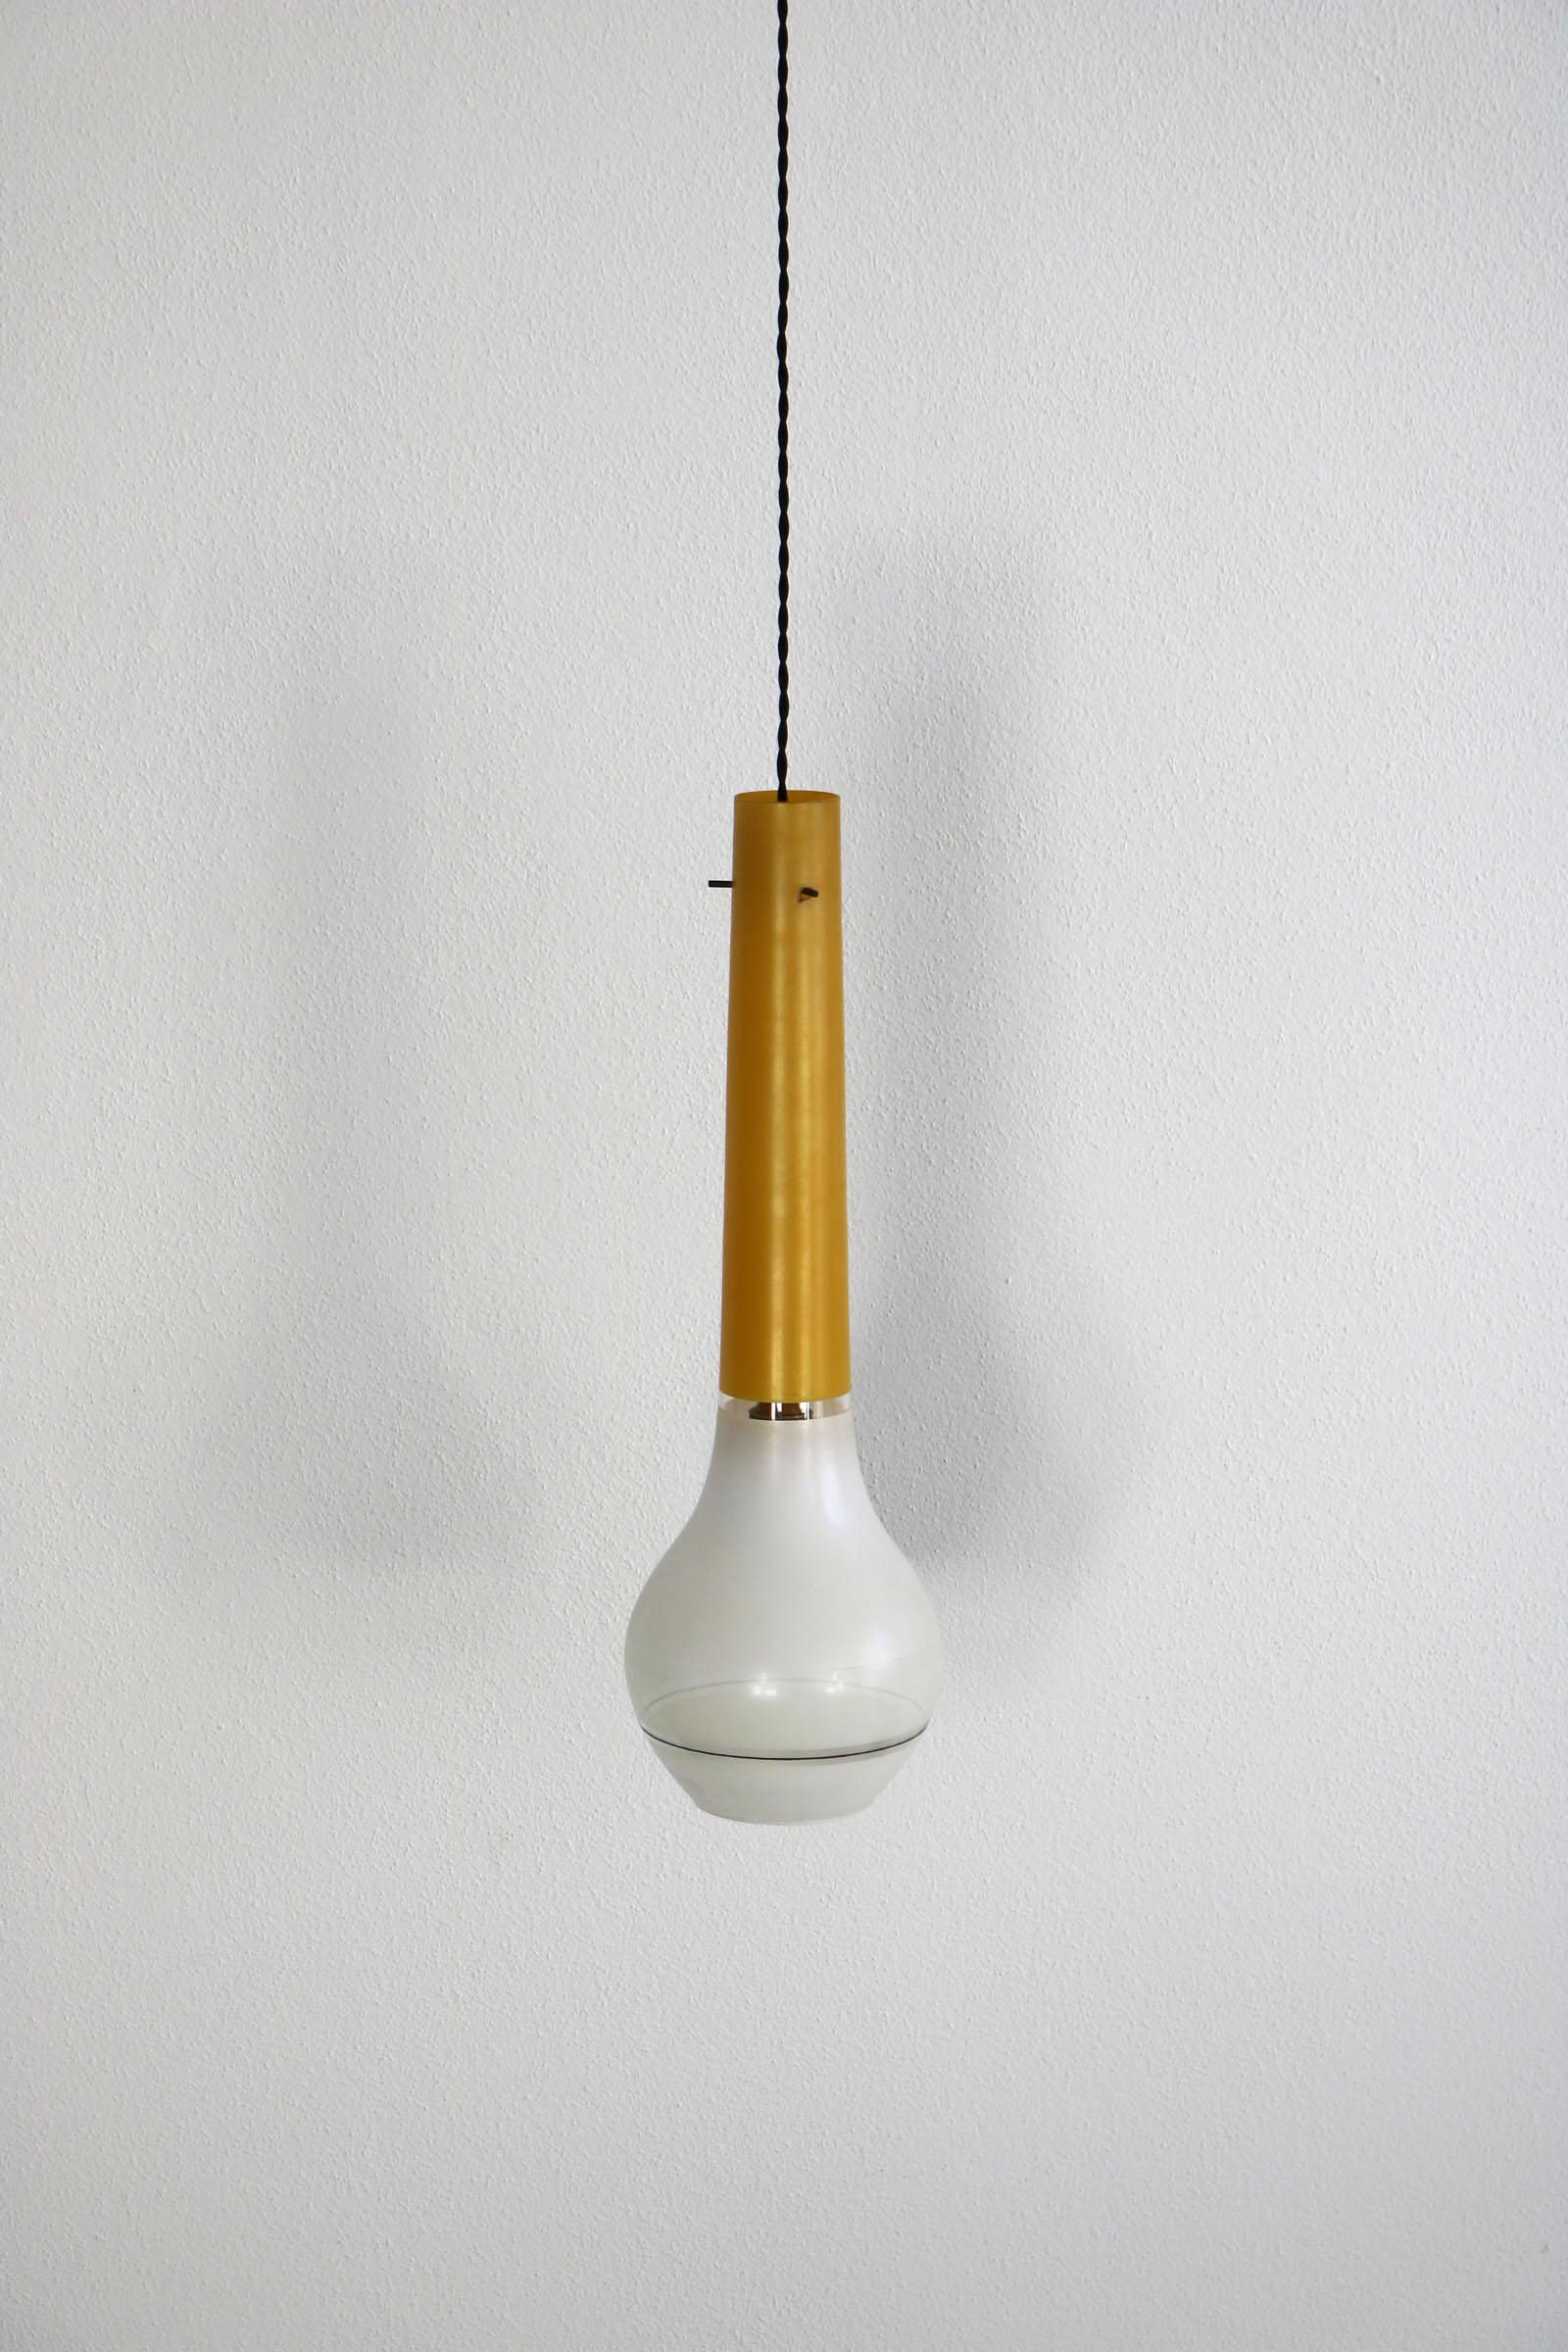 This Italian pendant comes from the 1960s. This Italian pendant comes from the 1960s. While the upper part of the lamp is made of yellow, elongated shaped glass, the lower part of the lamp is made of matt, white glass round shaped. It has a newly